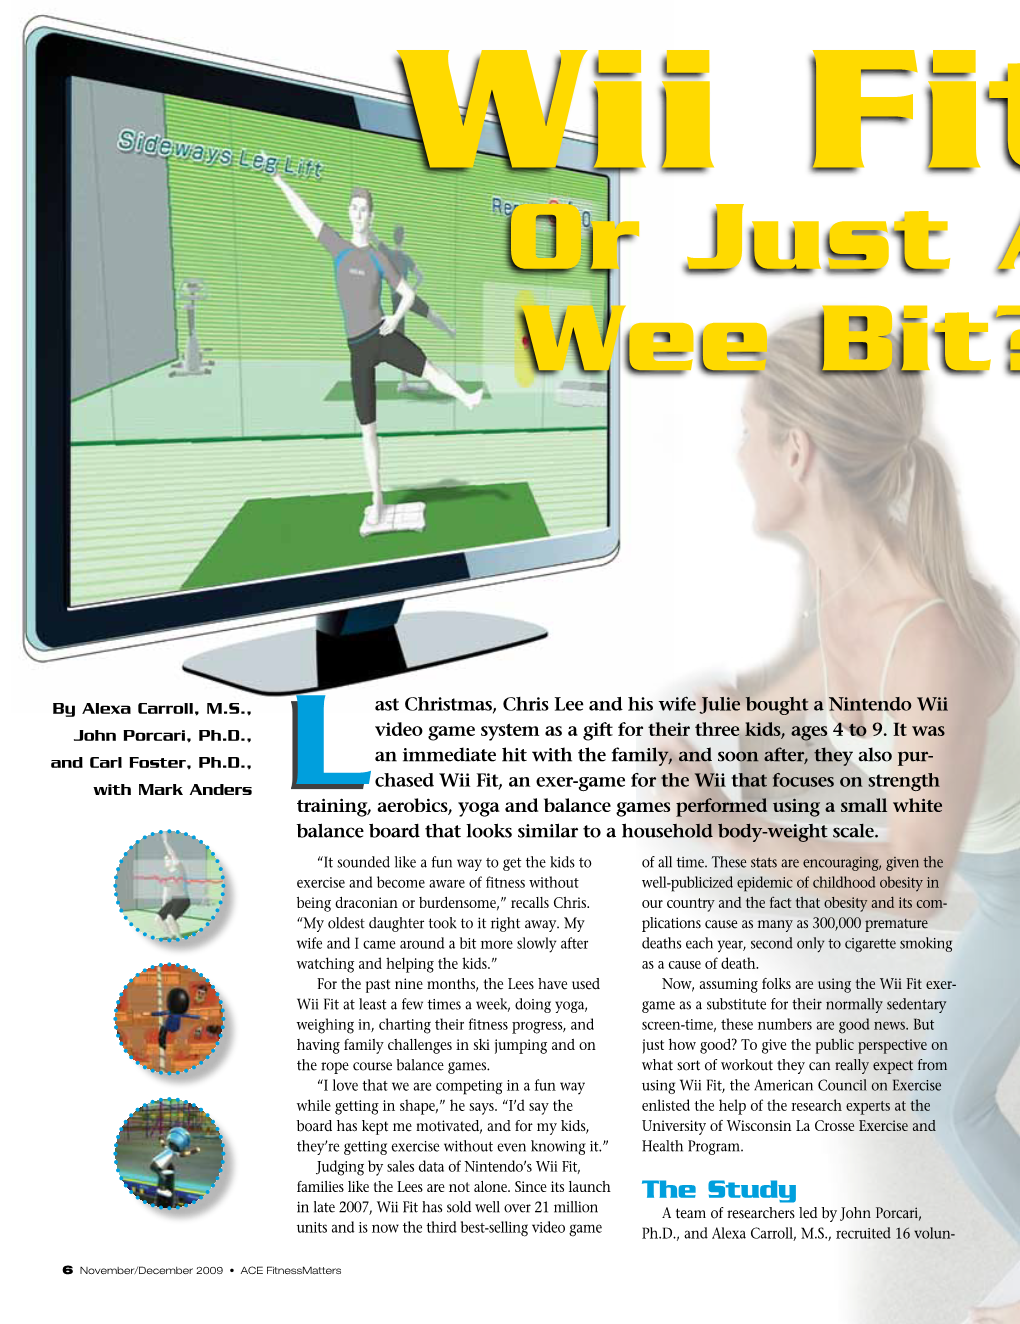 Wii Fit– Or Just a Wee Bit?